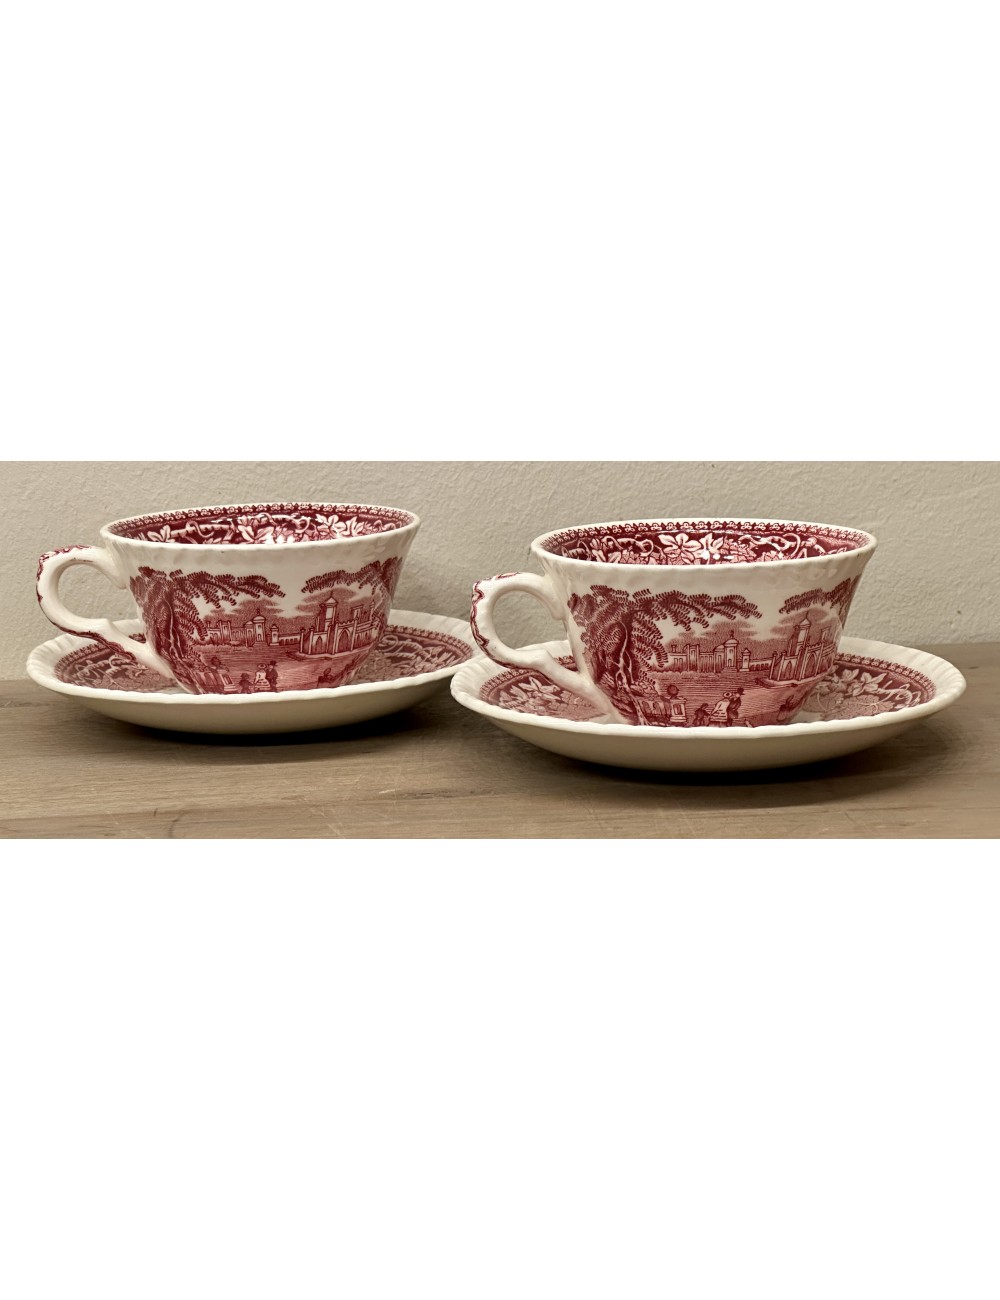 Cup and saucer - Mason's - décor VISTA in red finish